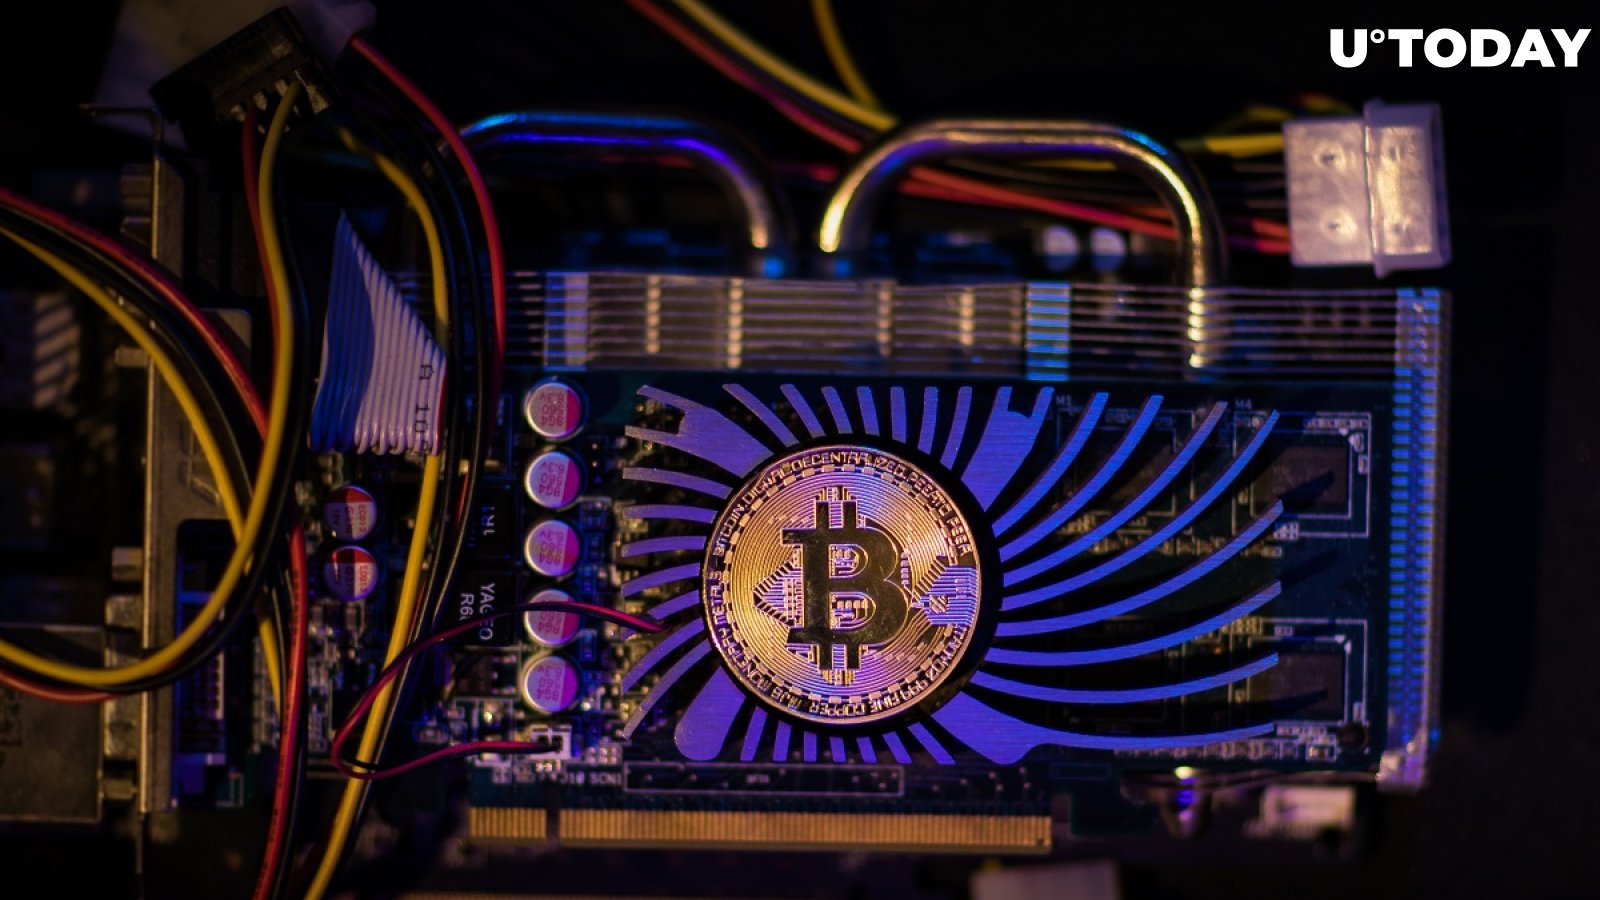 Bitcoin's Hashrate Hits Yet Another All-Time High of 127 EH/s